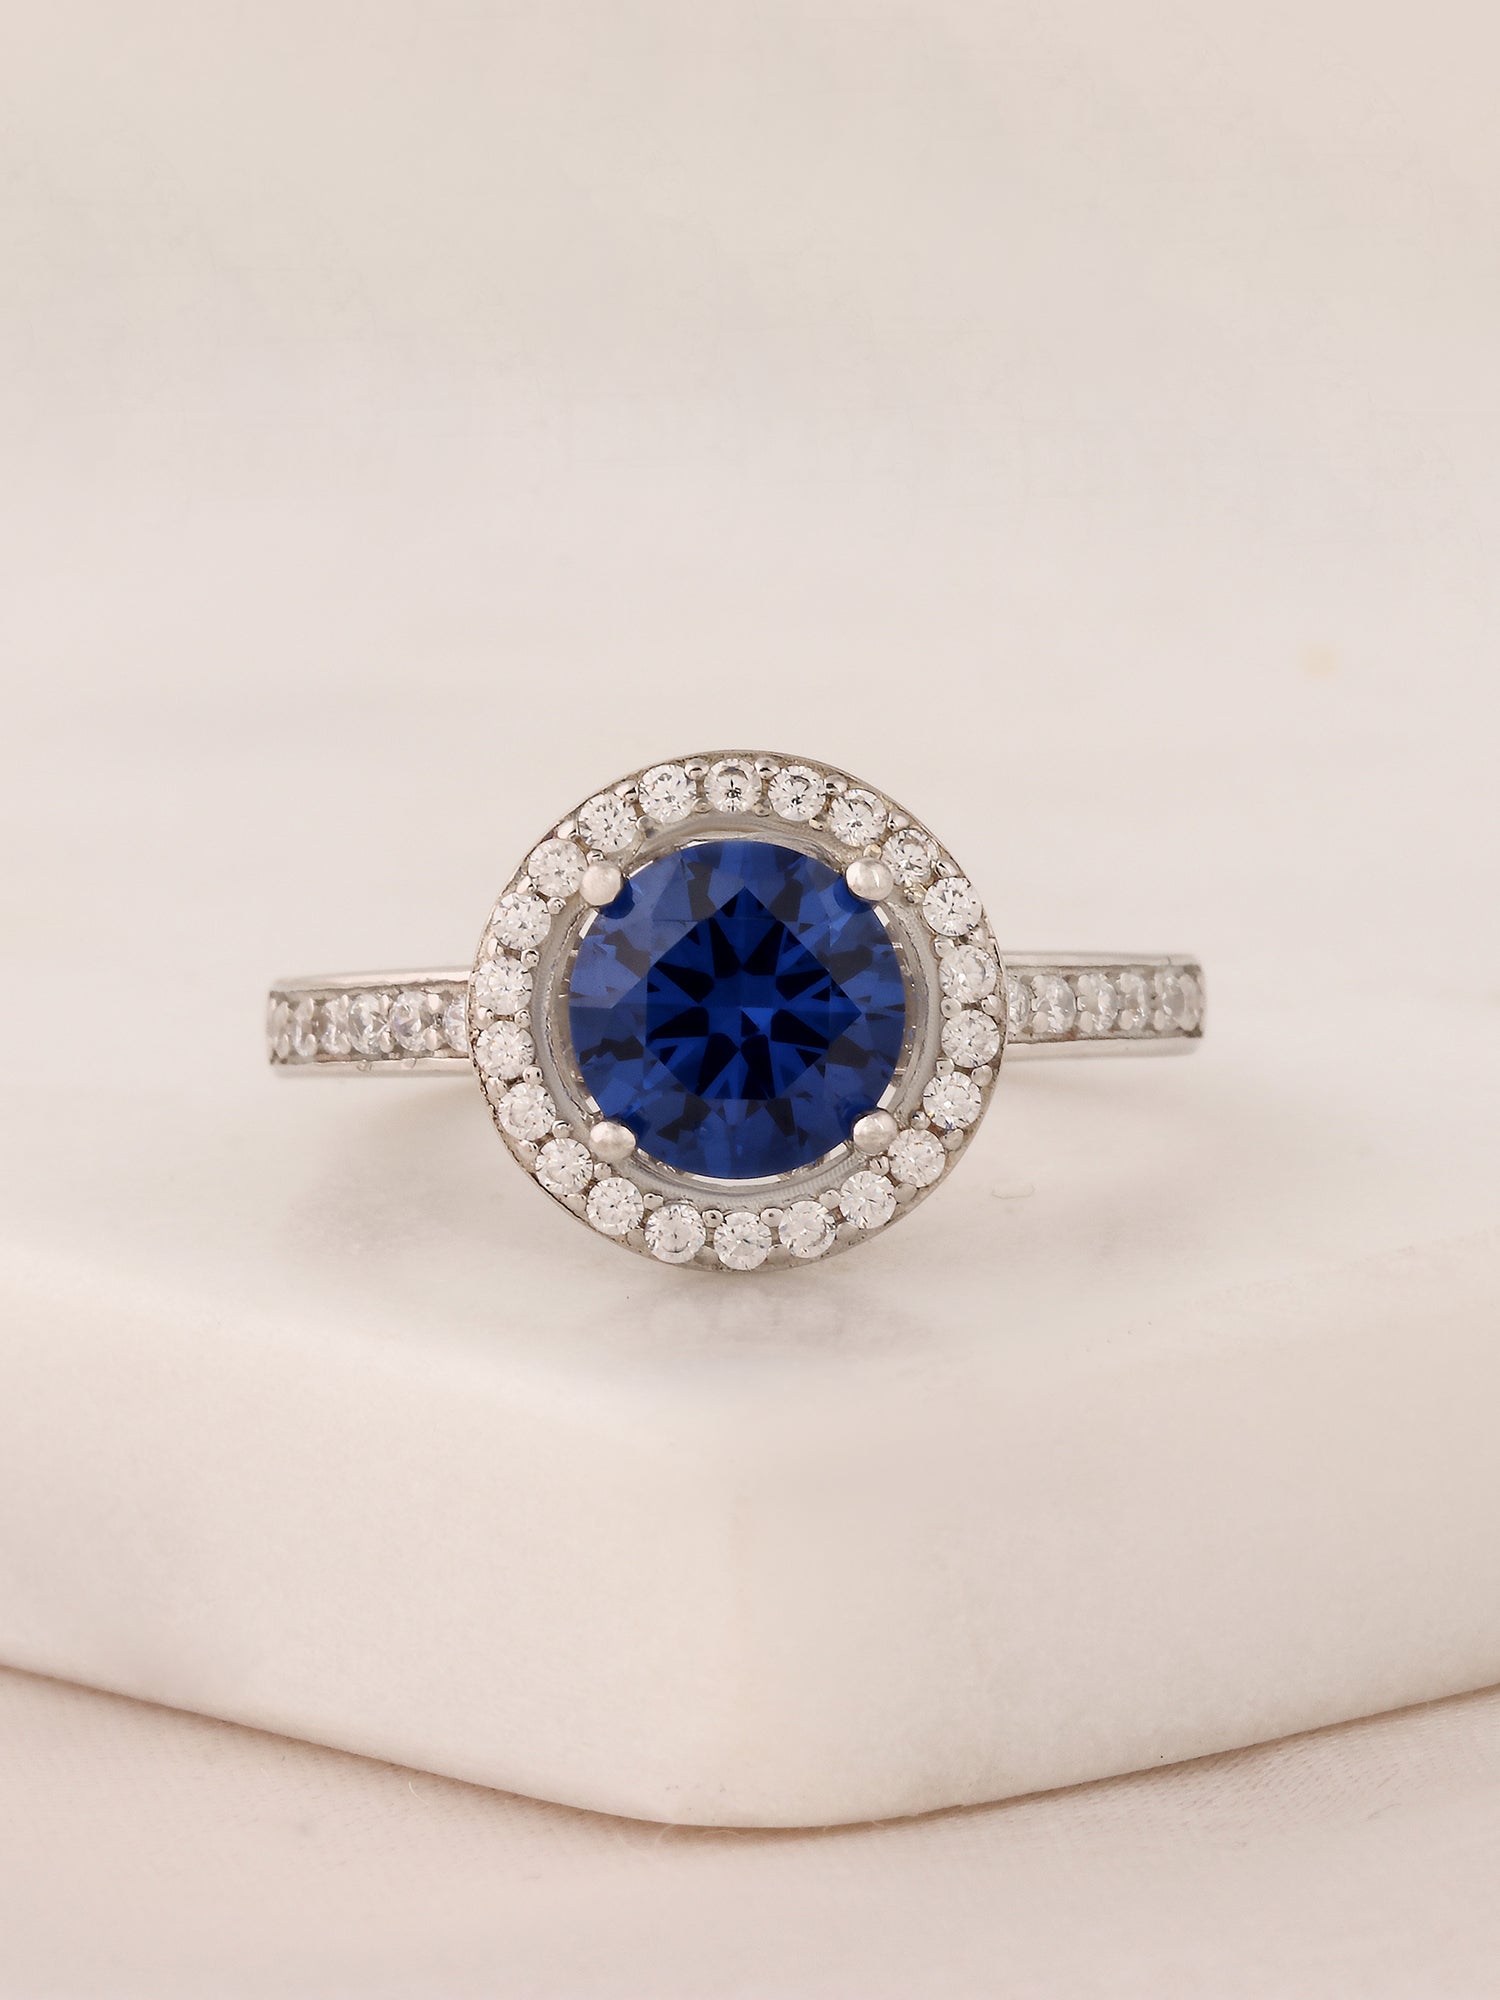 BLUE SAPPHIRE 925 SILVER RING IN BOUQUET DESIGN-8